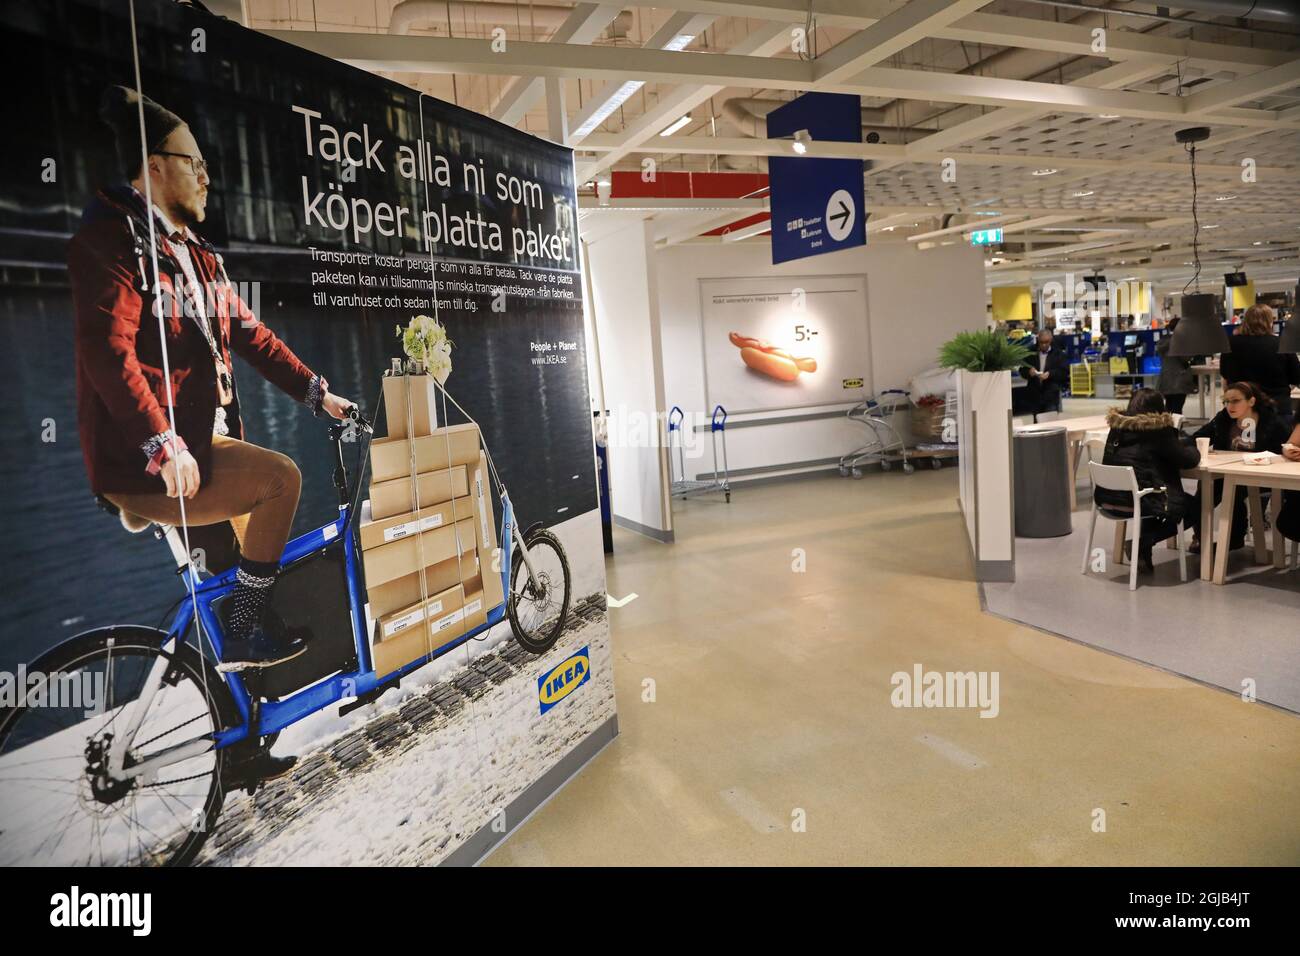 LINKOPING 20180128 Customers at the IKEA store in Linkoping, Sweden, on Jan. 28, 2018. Ingvar Kamprad, founder of Swedish multinational furniture retailer IKEA has died at an age of 91. Photo Jeppe Gustafsson / TT / code 71935 ** BETALBILD **  Stock Photo